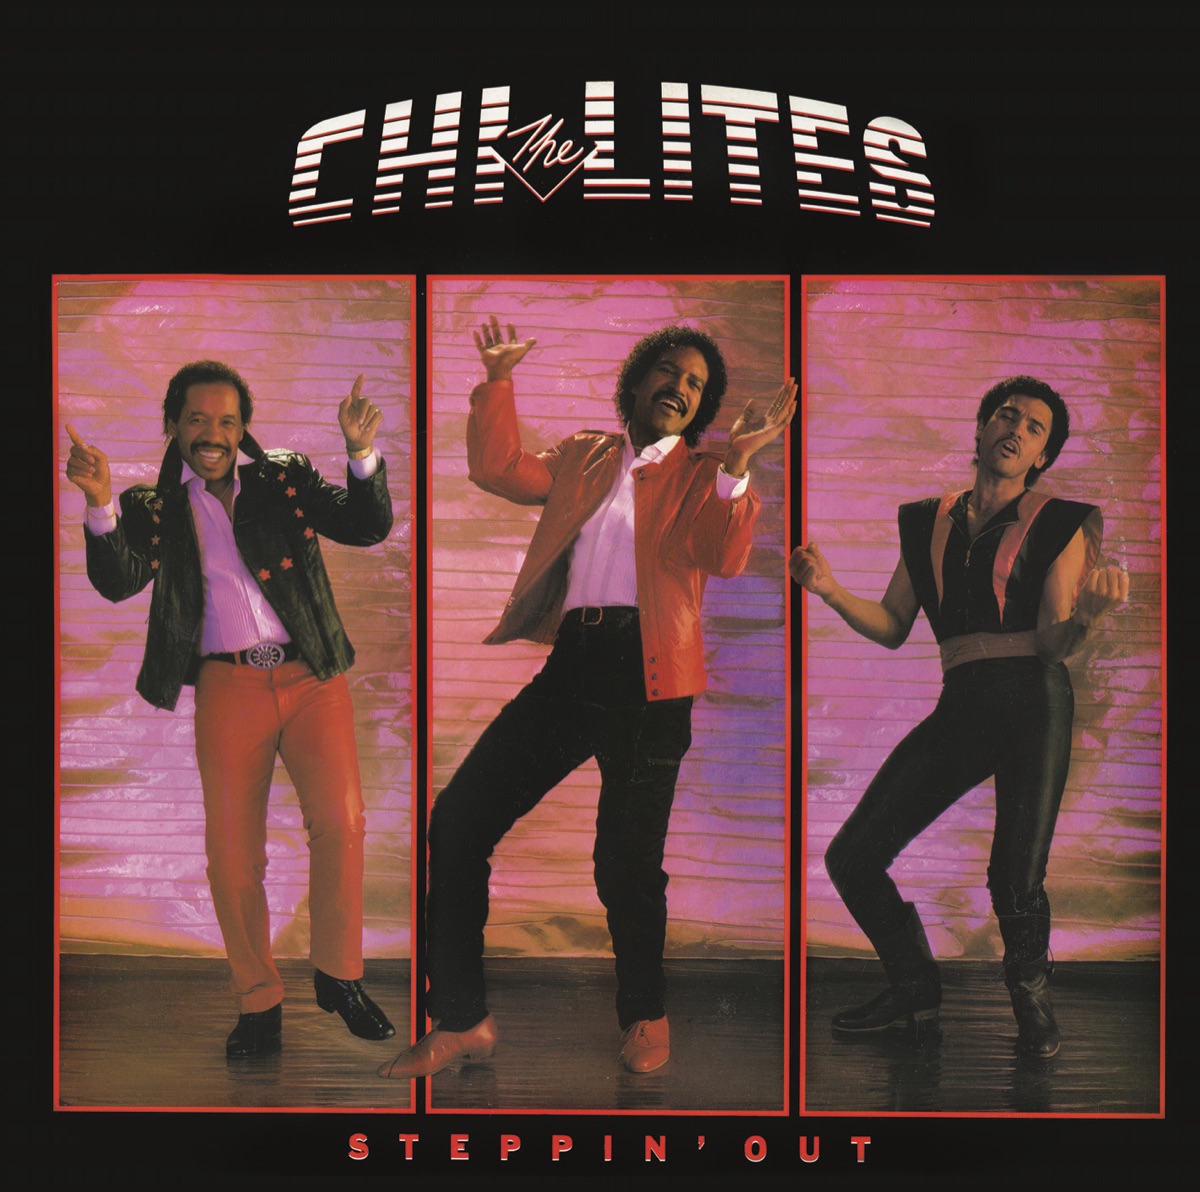 20 Greatest Hits - Album by The Chi-Lites - Apple Music